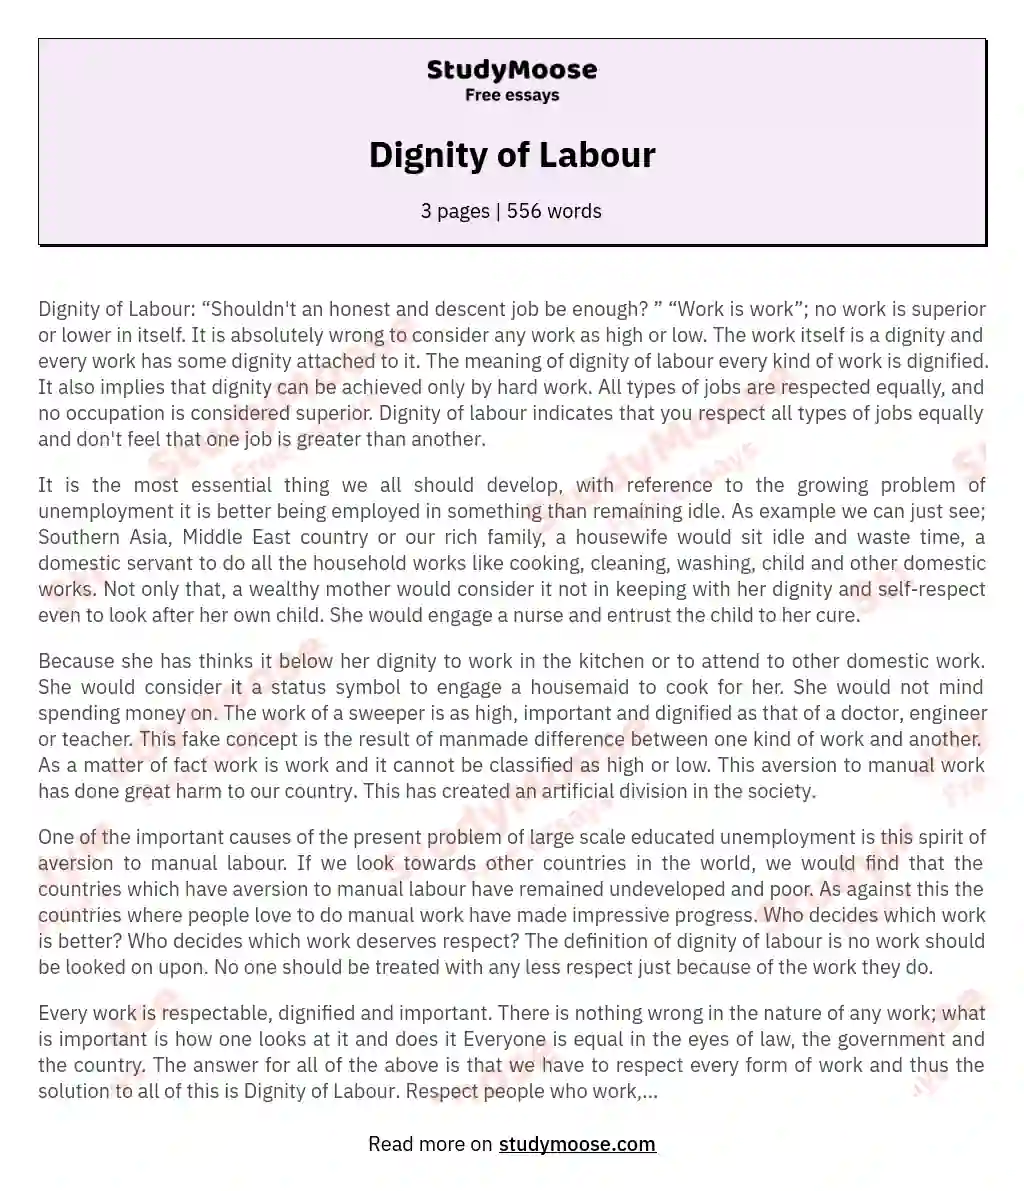 Dignity of Labour essay